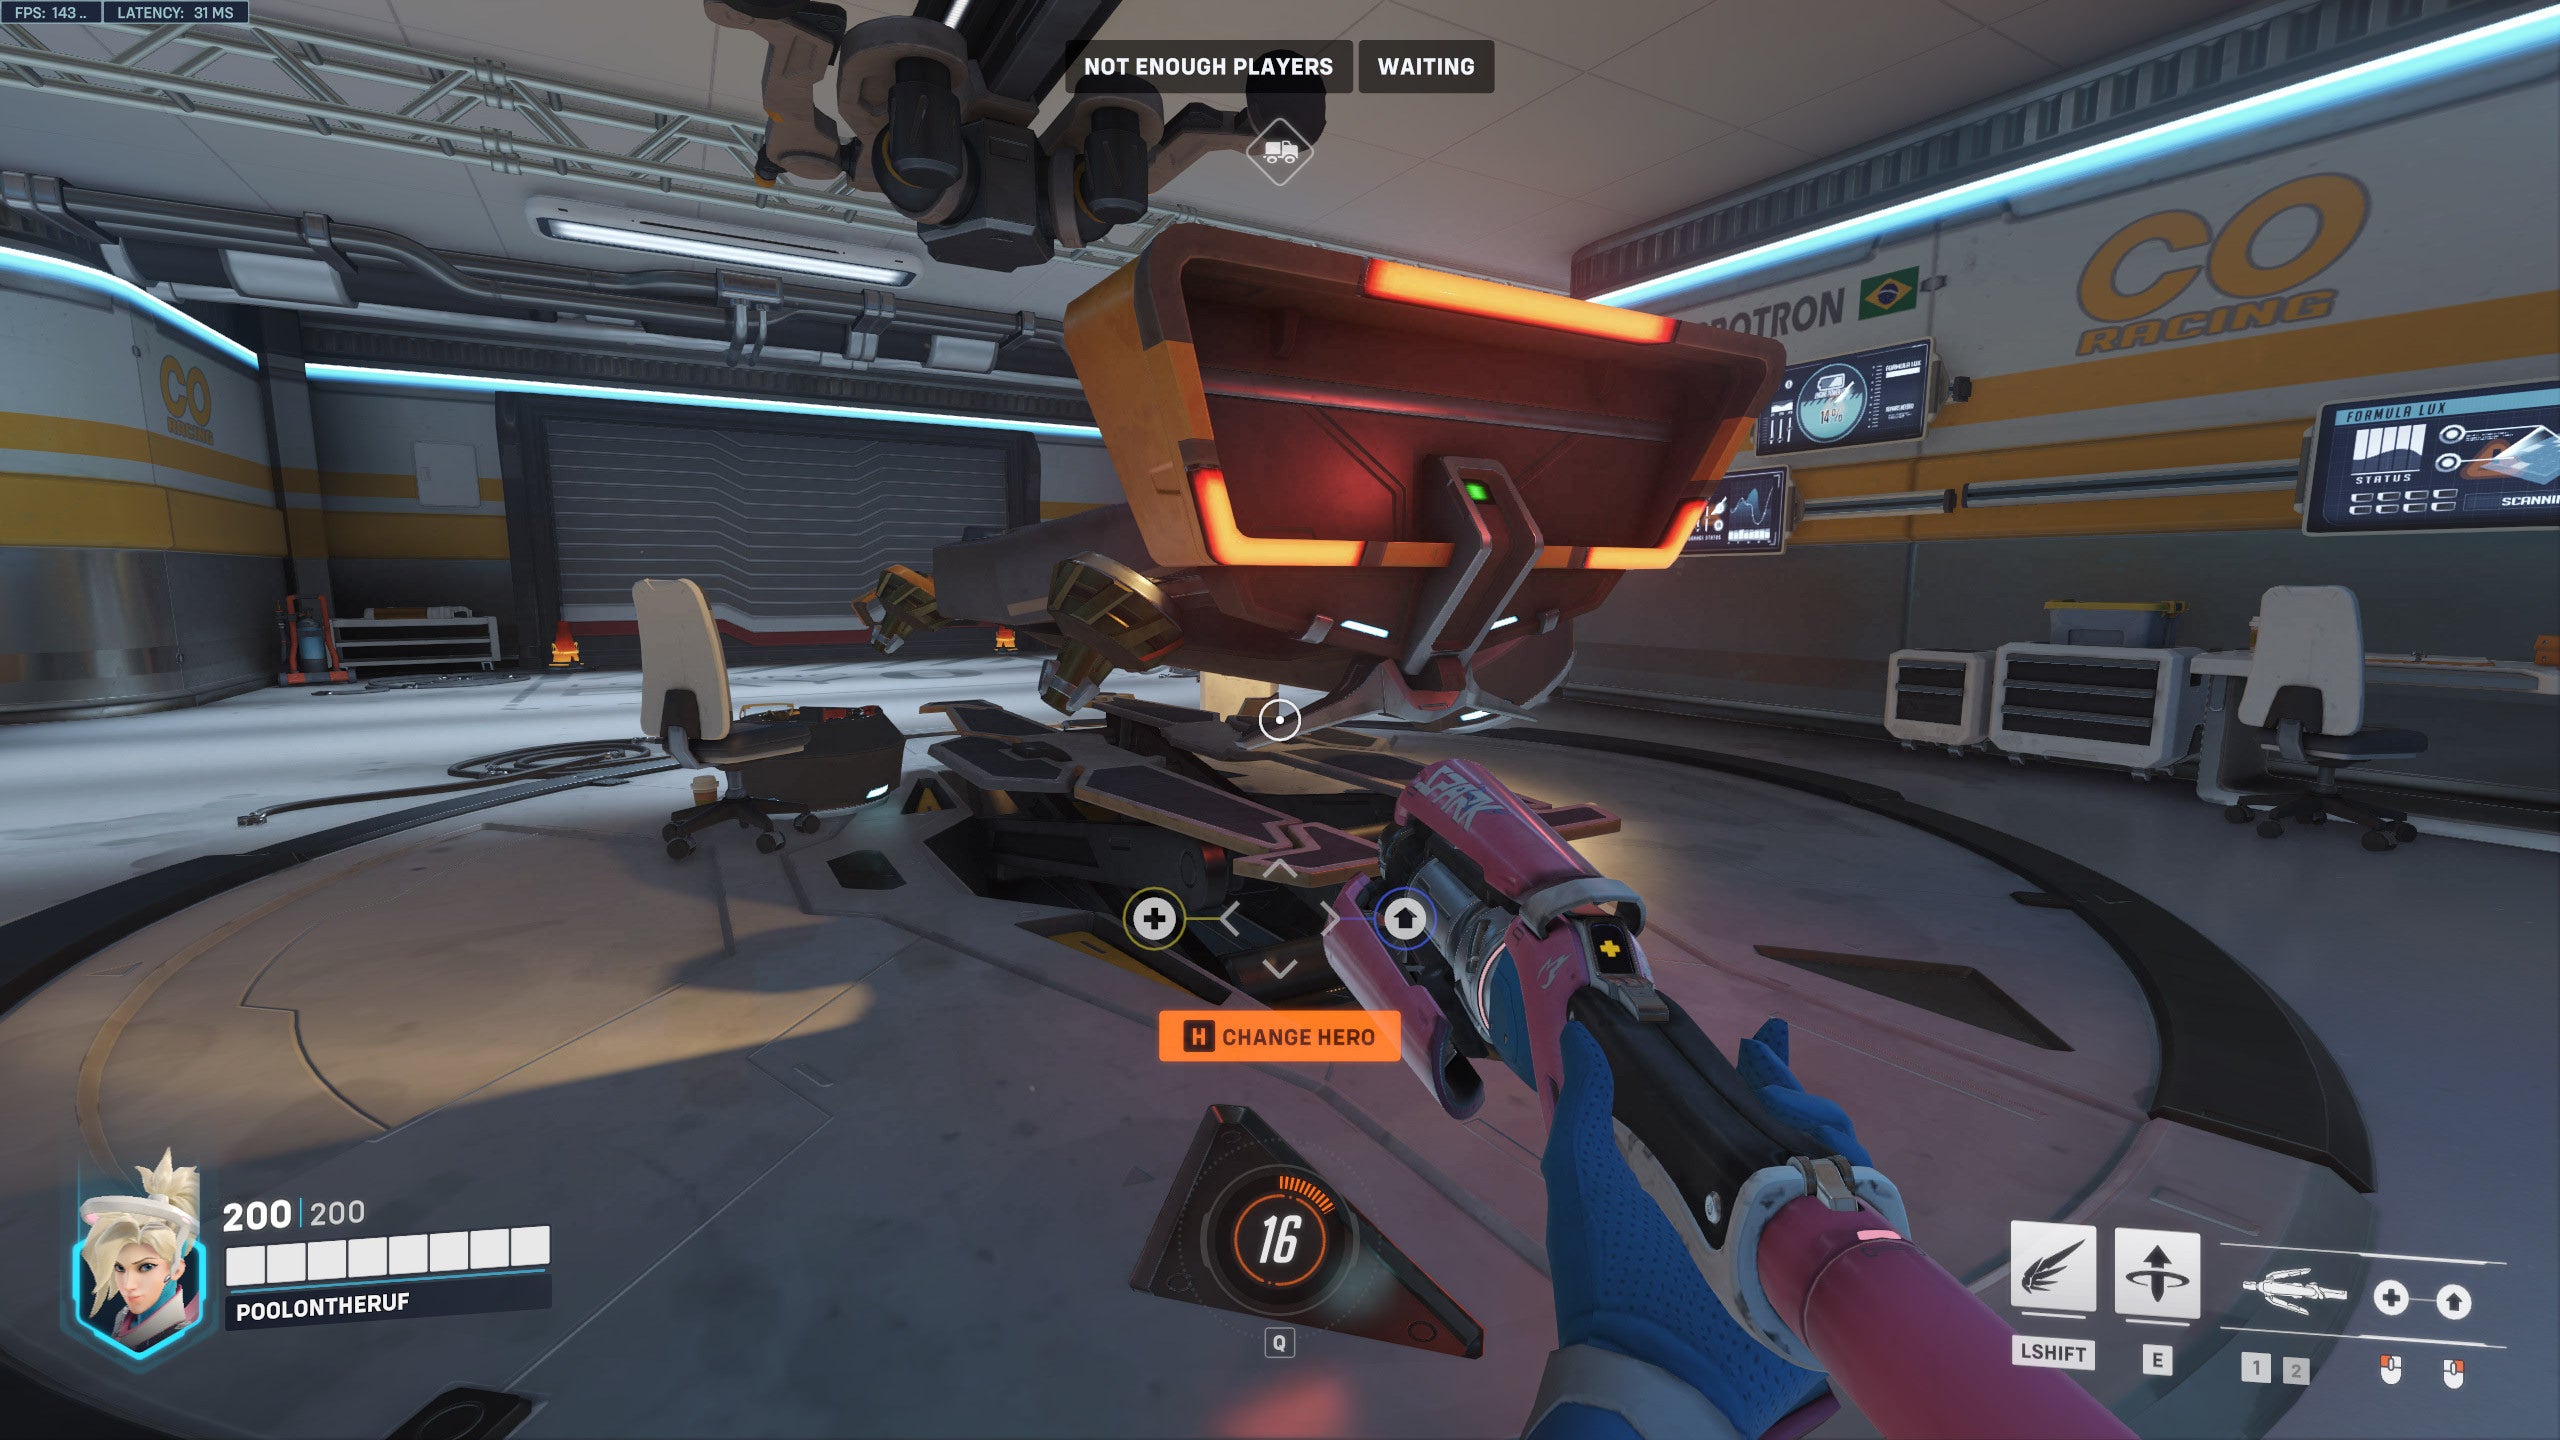 What’s Up With the Race Cars In Overwatch 2’s Monte Carlo Map?